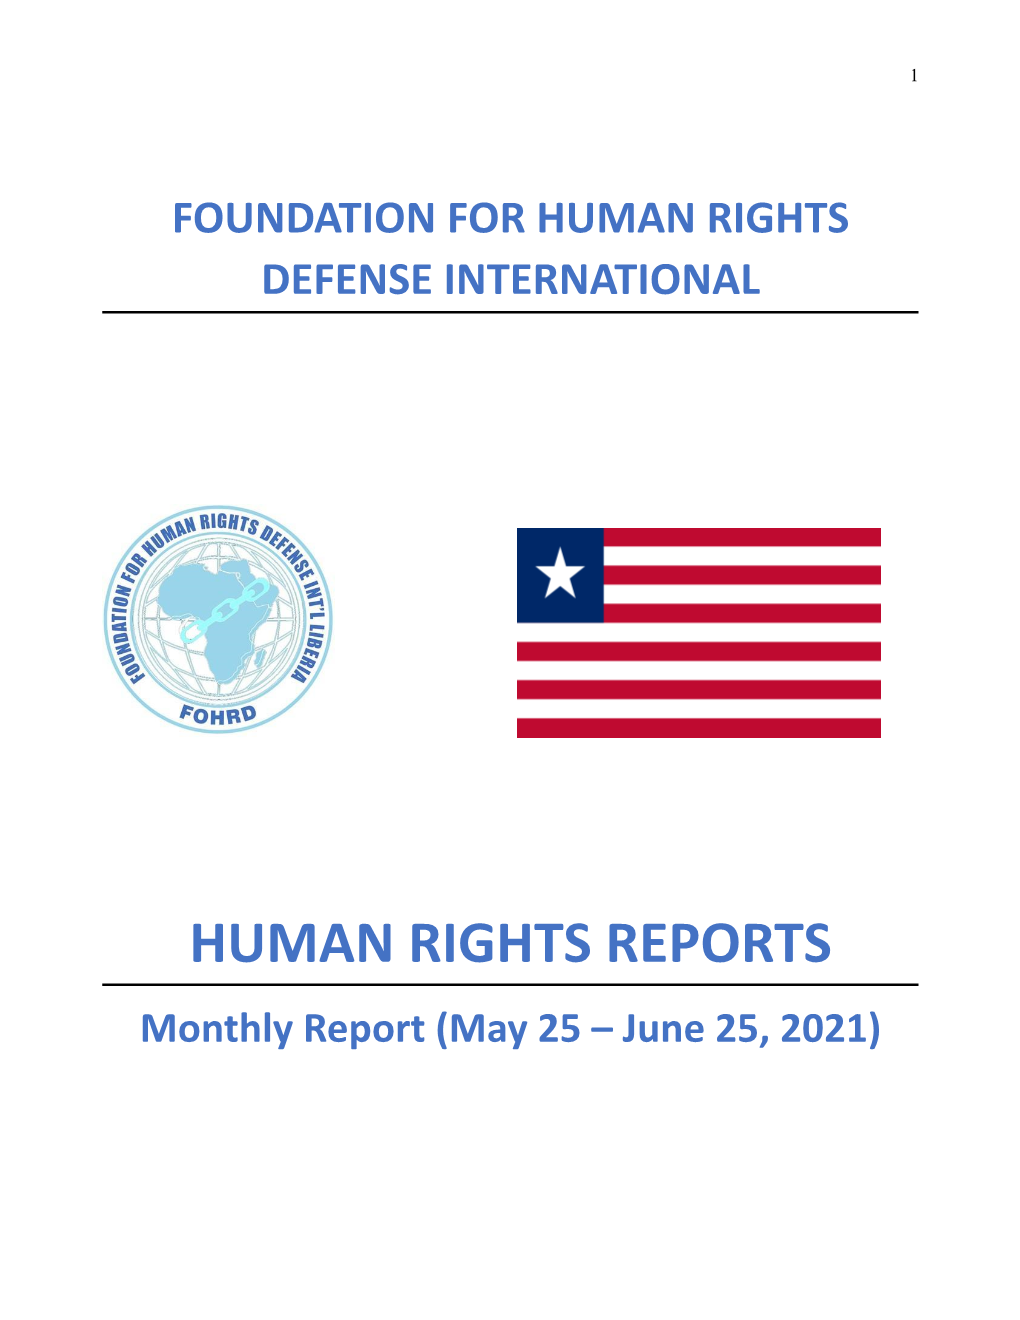 HUMAN RIGHTS REPORTS Monthly Report (May 25 – June 25, 2021) 2